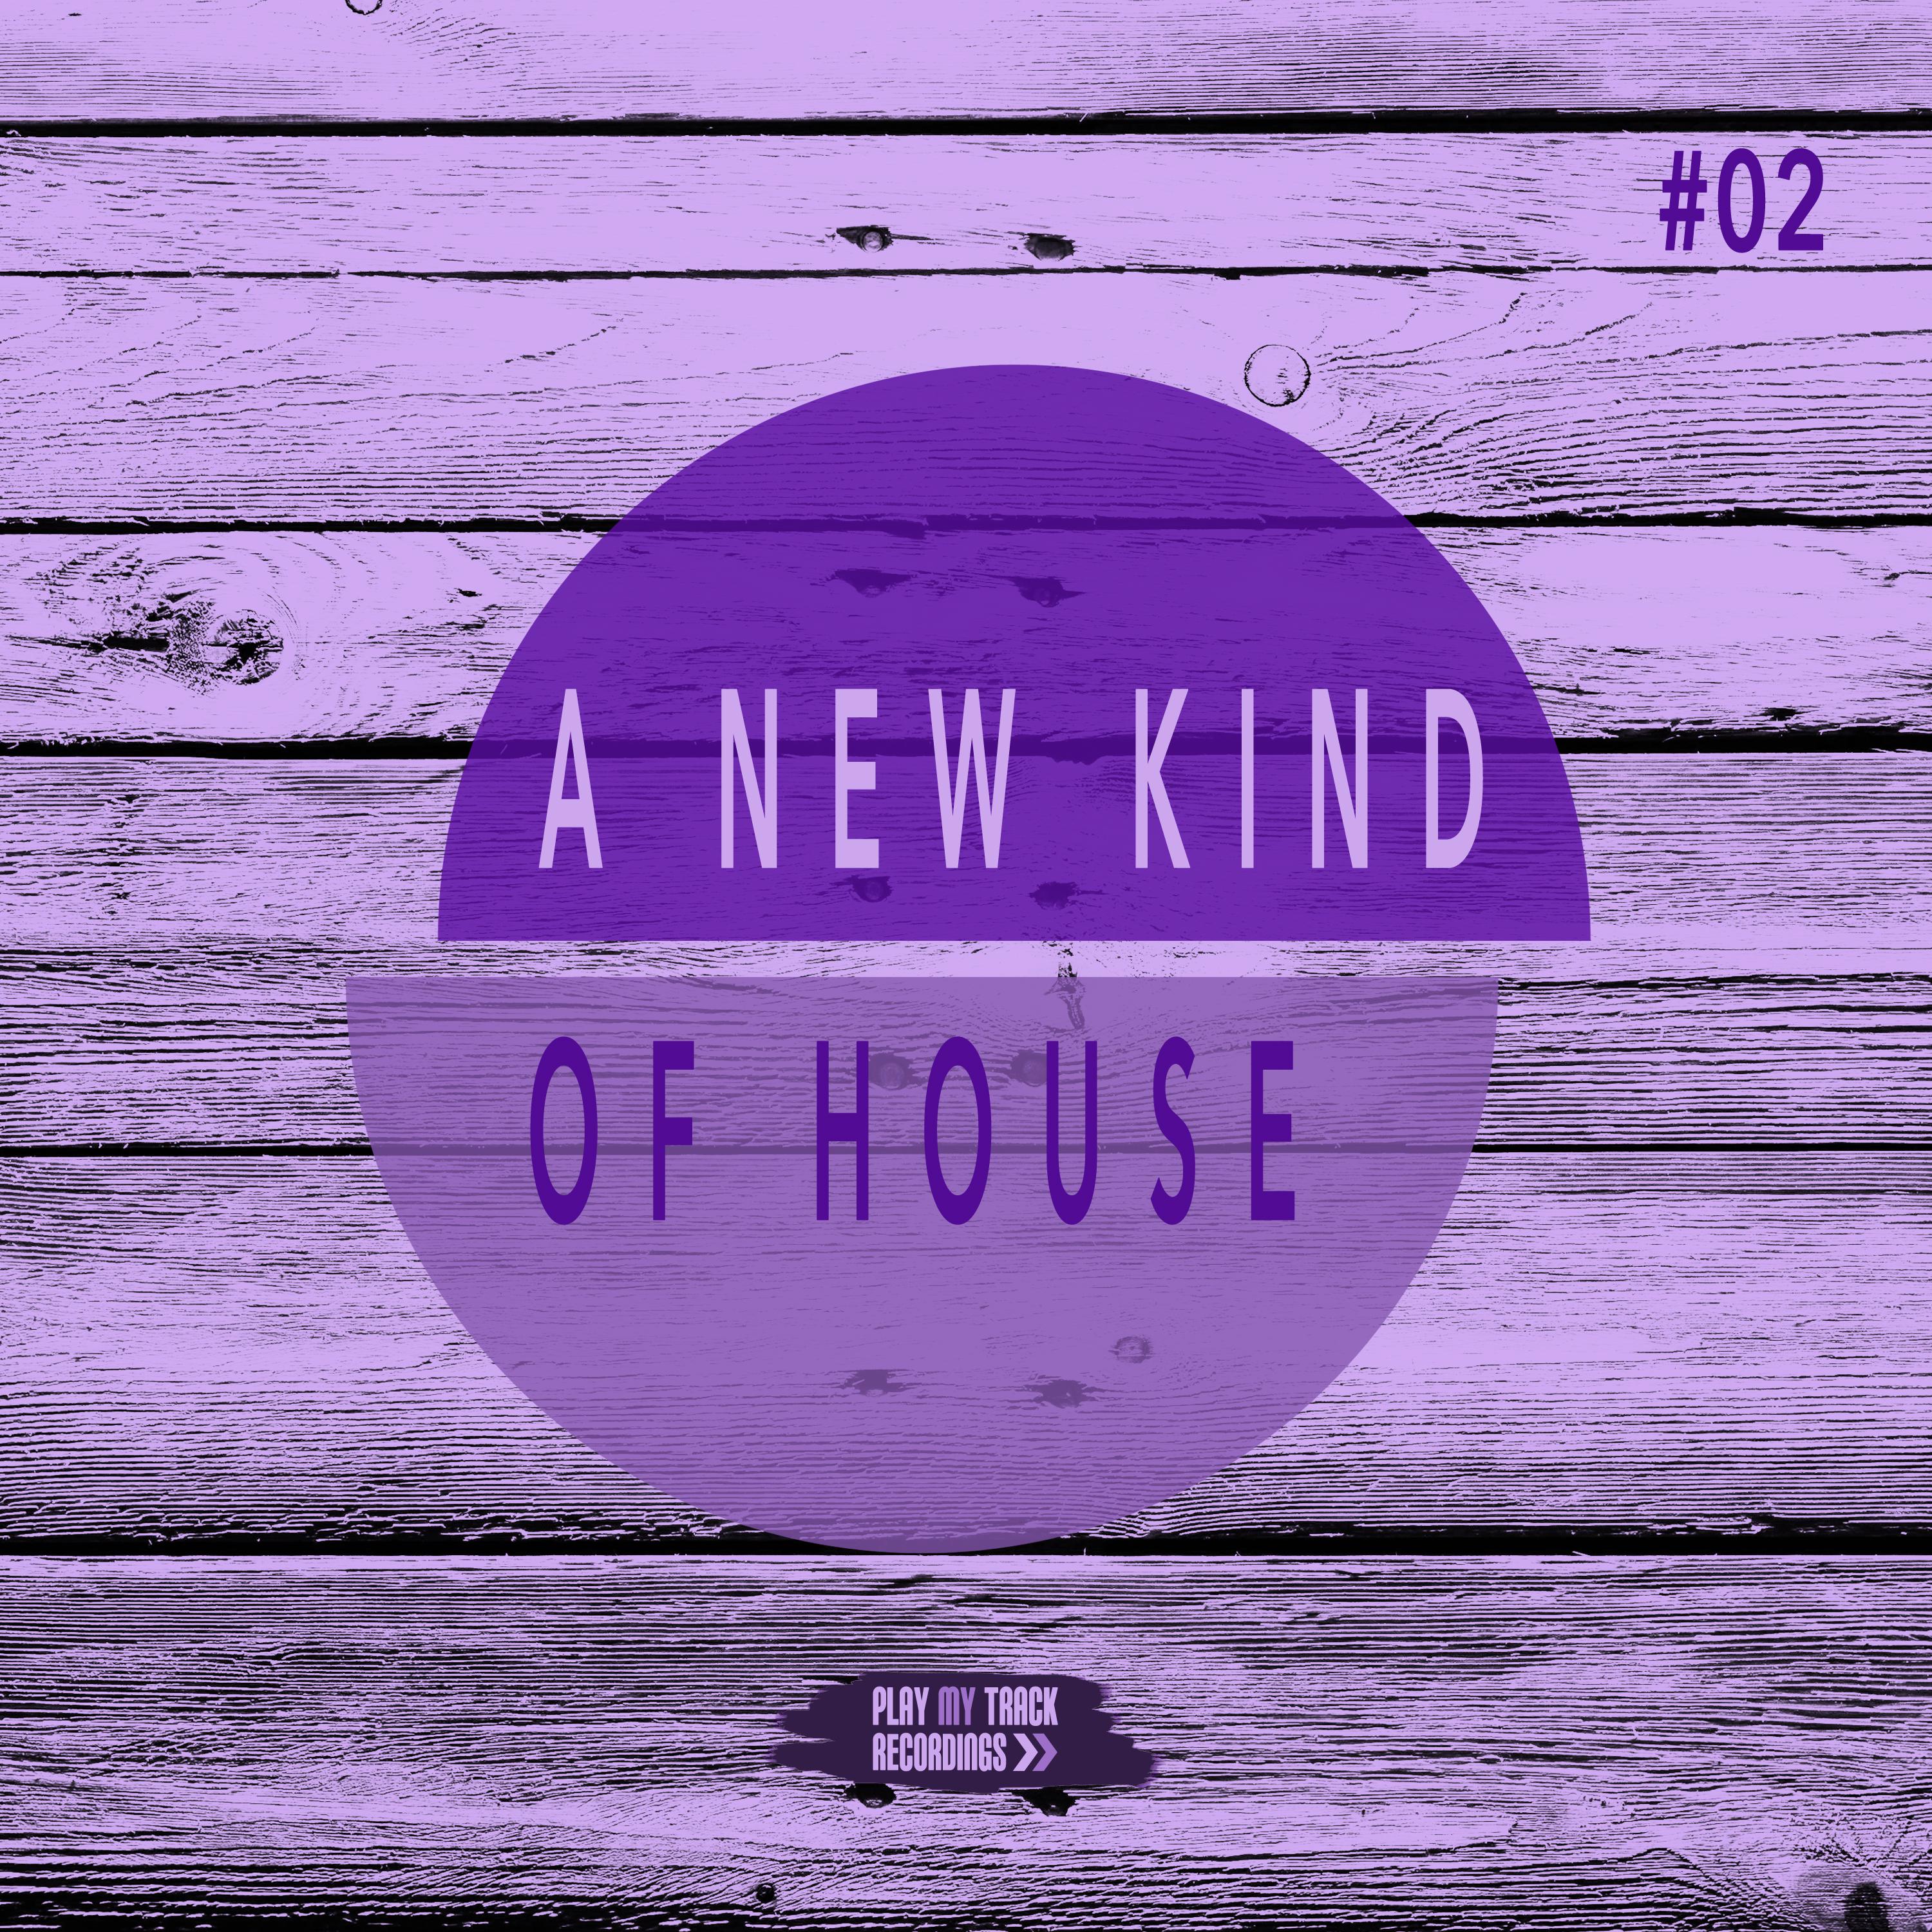 A New Kind of House, Vol. 2